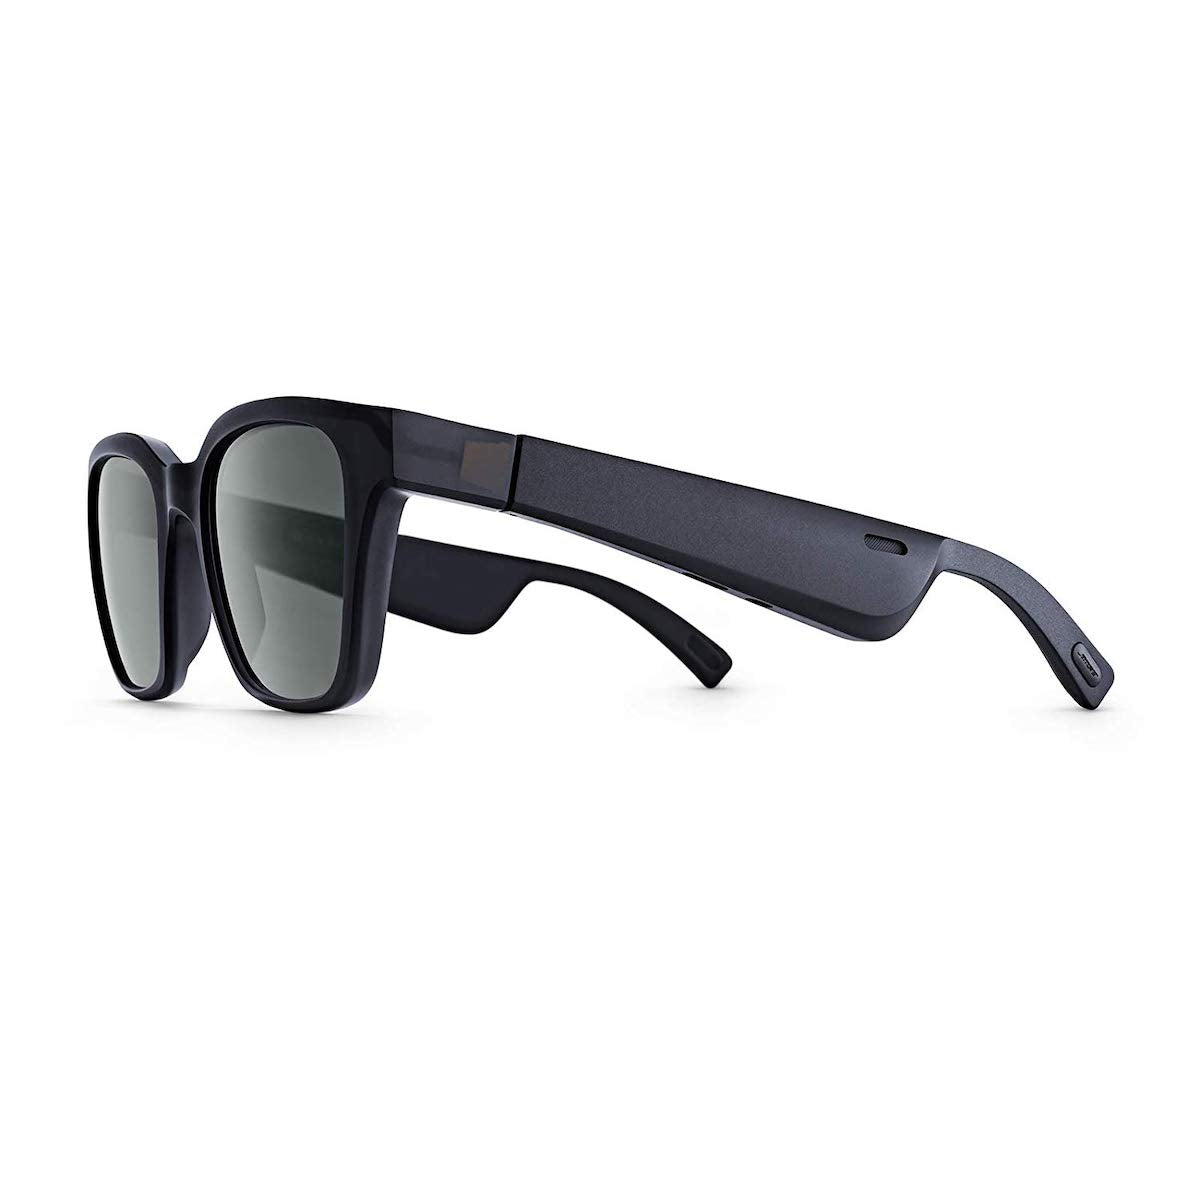 Bose Frames Tenor - Rectangular Polarized, Audio Sunglasses, Bluetooth,  Open-Ear Headphones, Water Resistant and Advance Mic System, Black :  Amazon.in: Clothing & Accessories